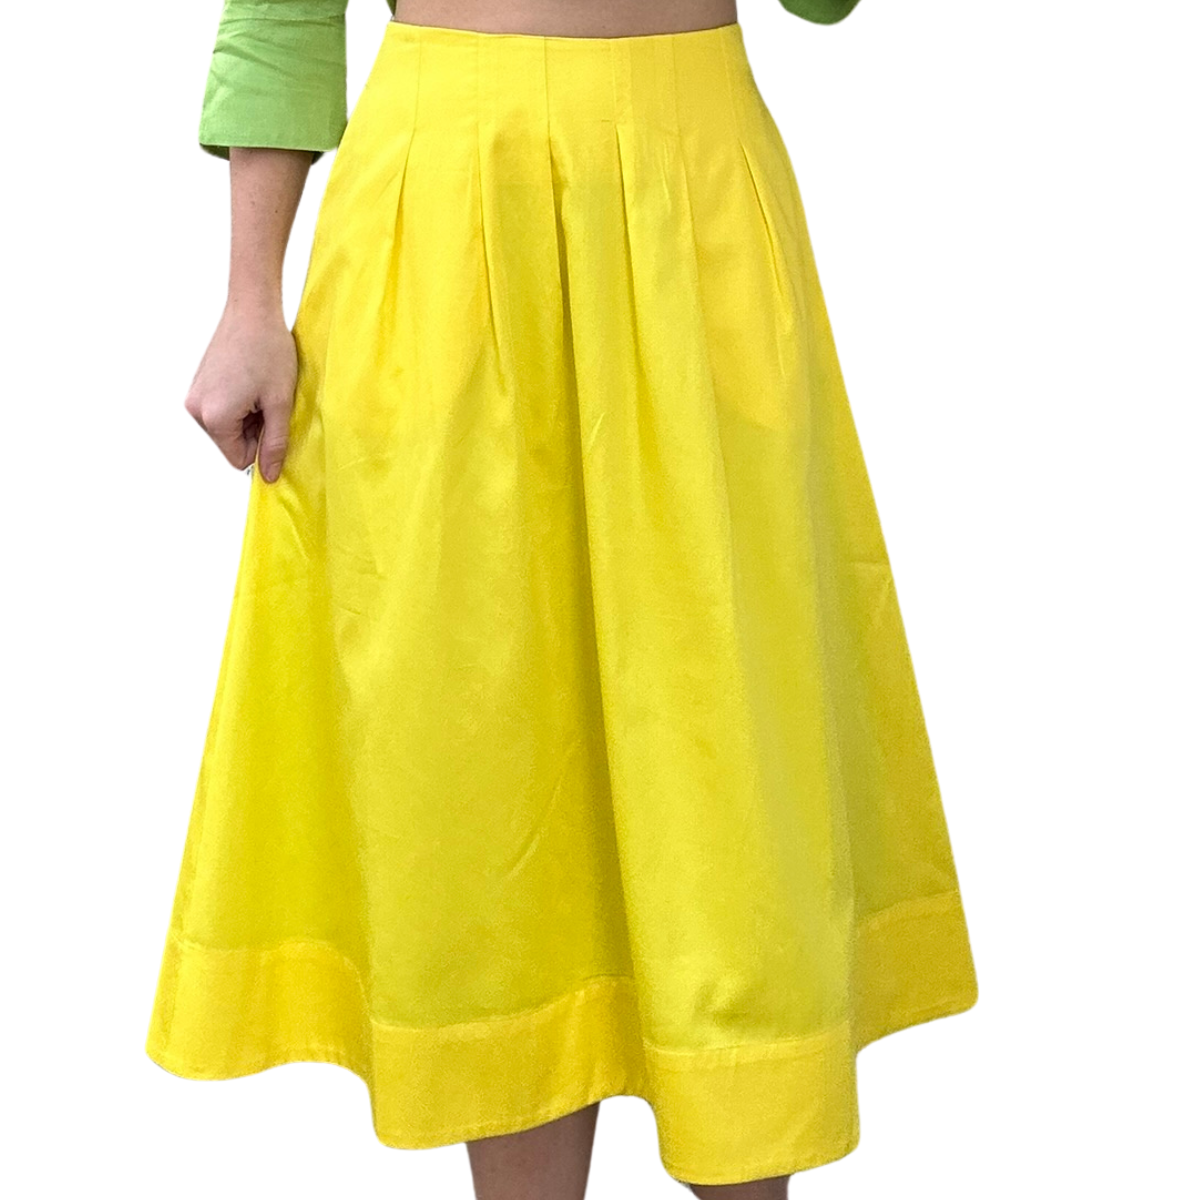 Cady Cotton Party Skirt - (black or yellow)